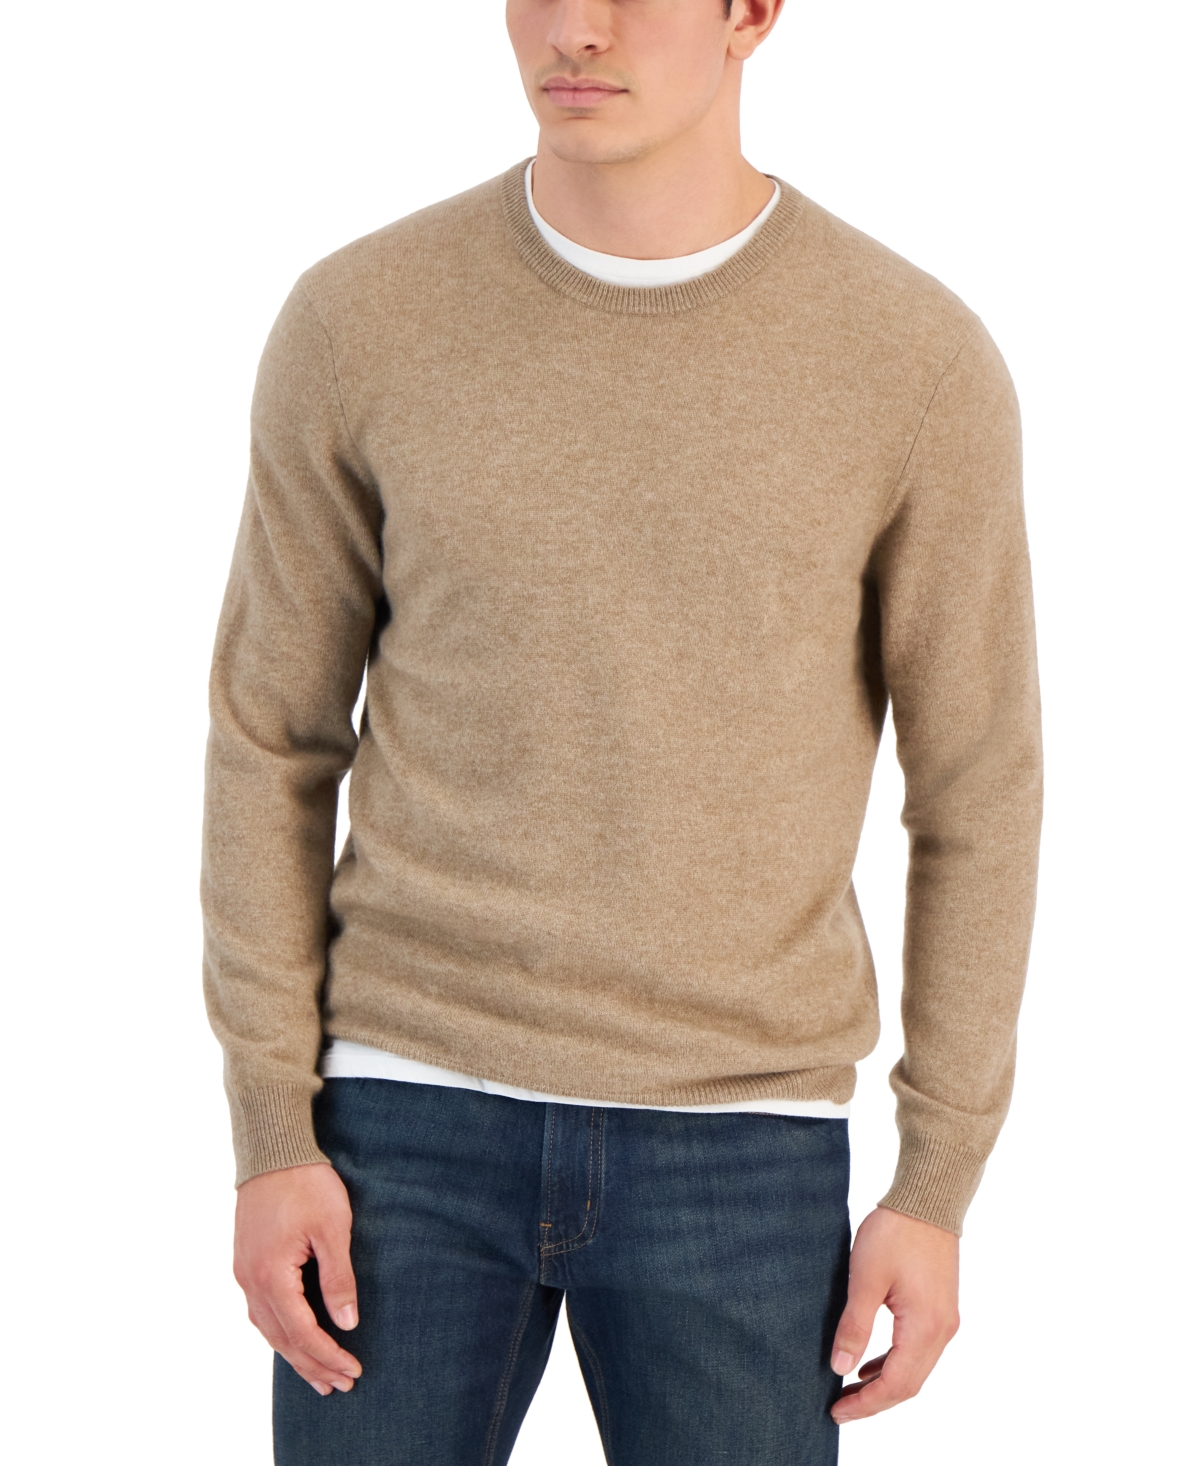 Cashmere Crew-Neck Sweater, Created for Macy's - Heirloom Rose Heather